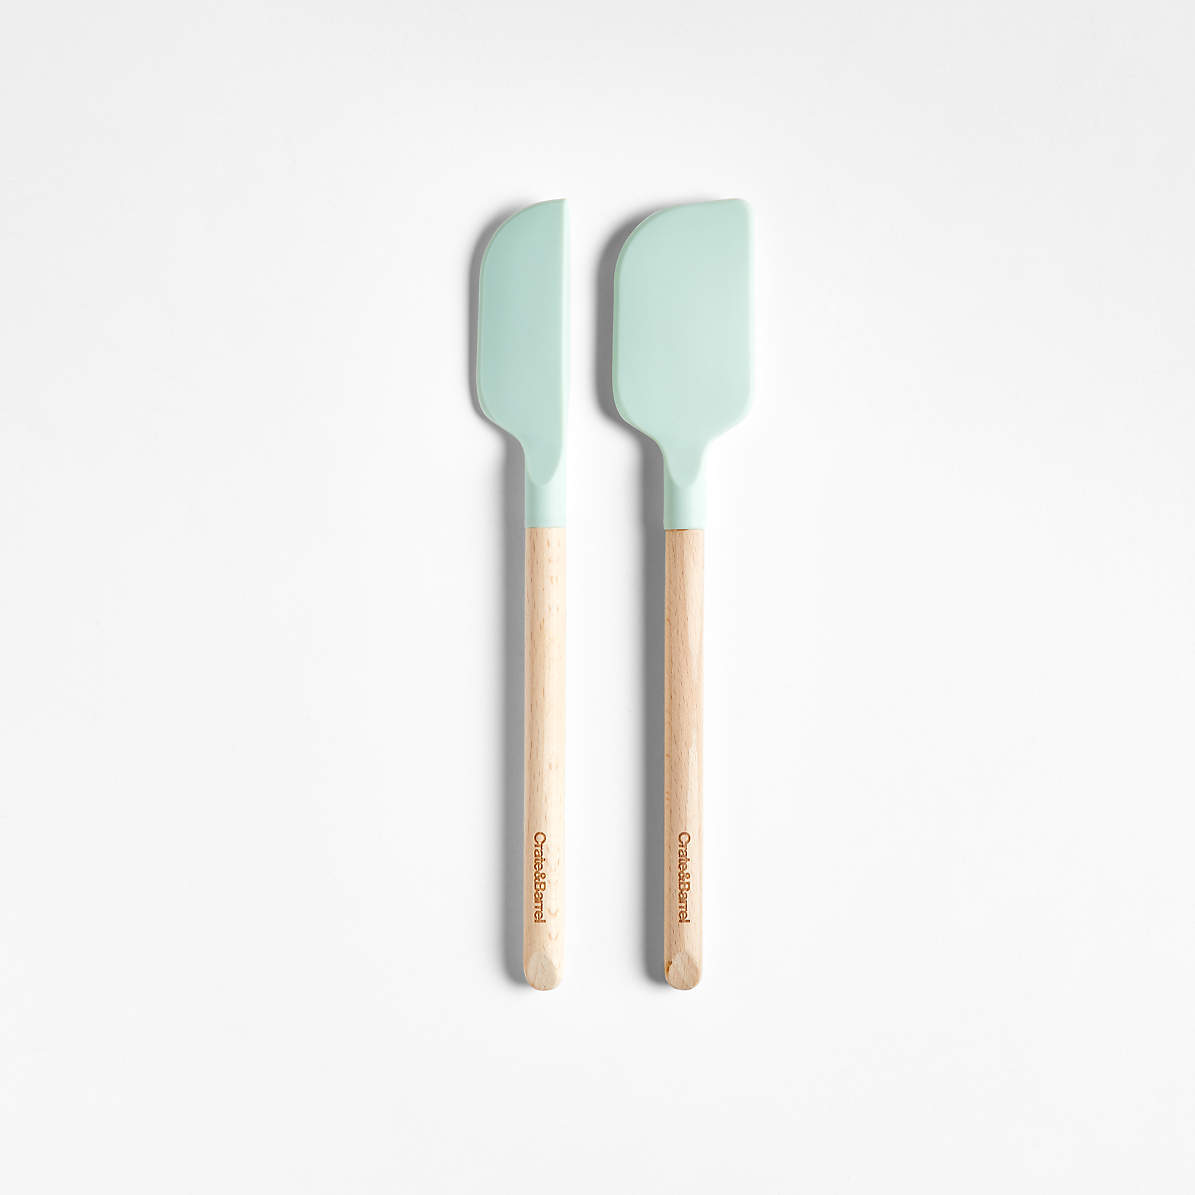 Crate & Barrel Sage Green Silicone & Wood Utensils